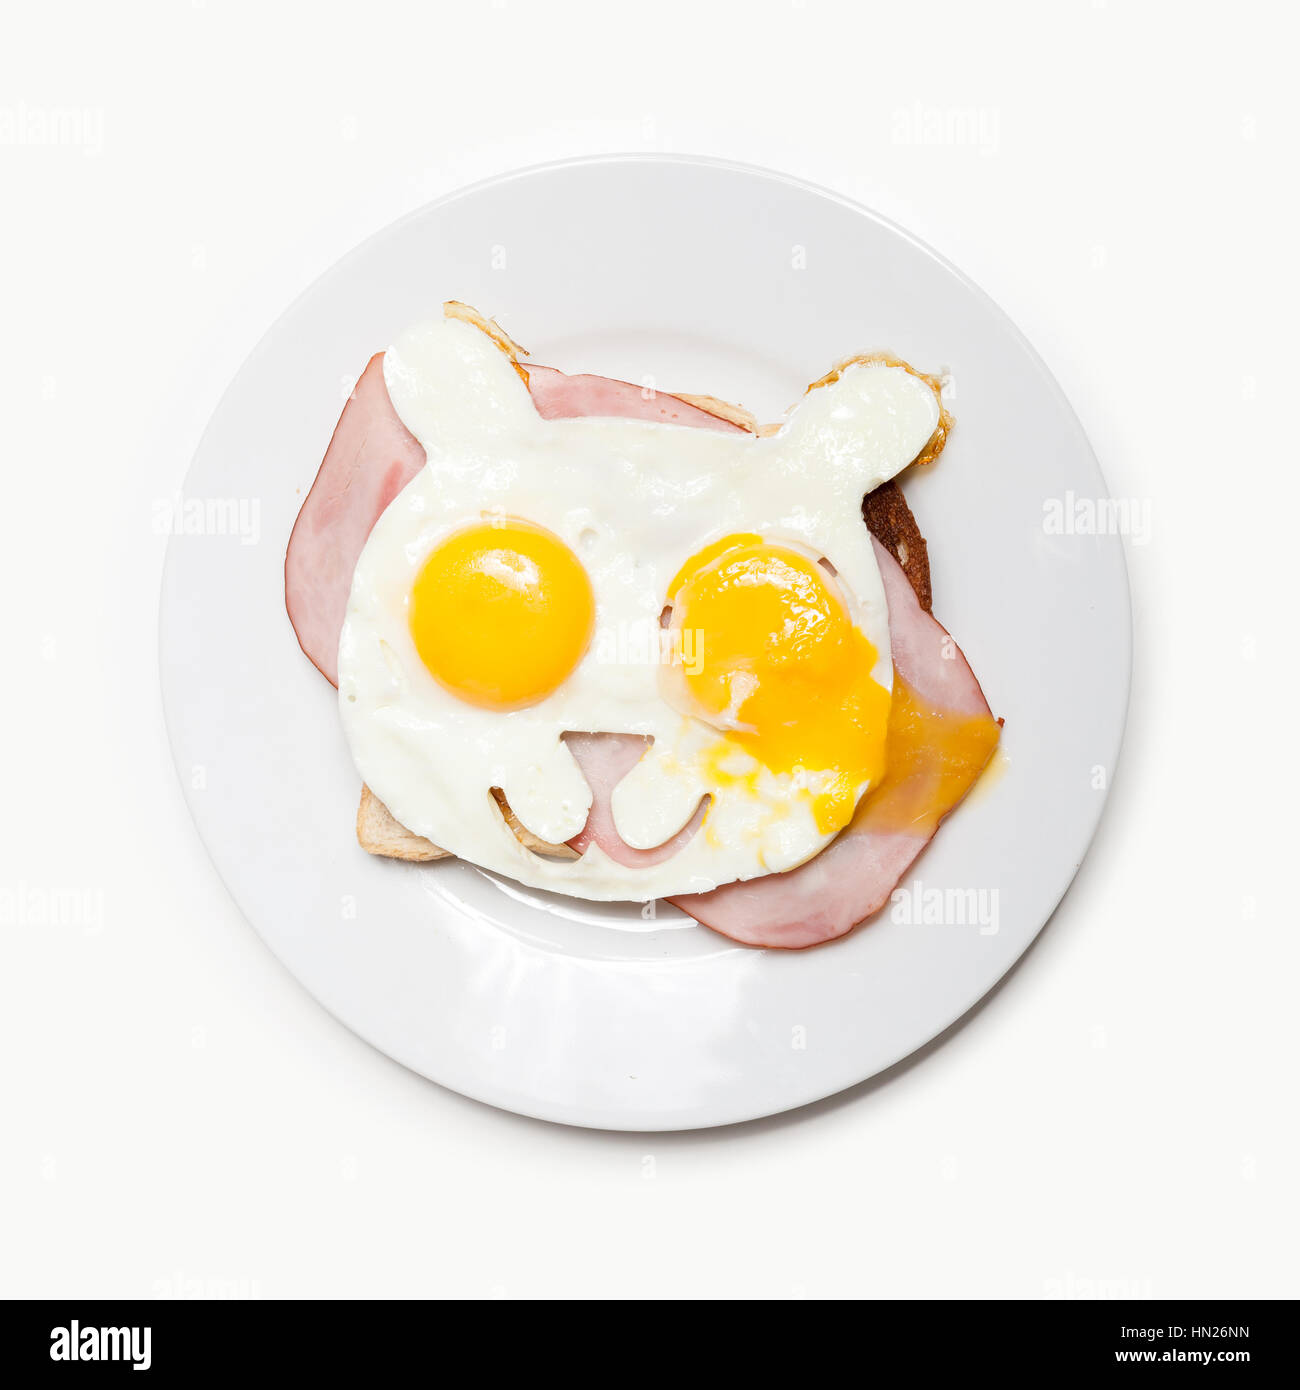 Fried eggs in the shape of a bear on toast with ham. Stock Photo